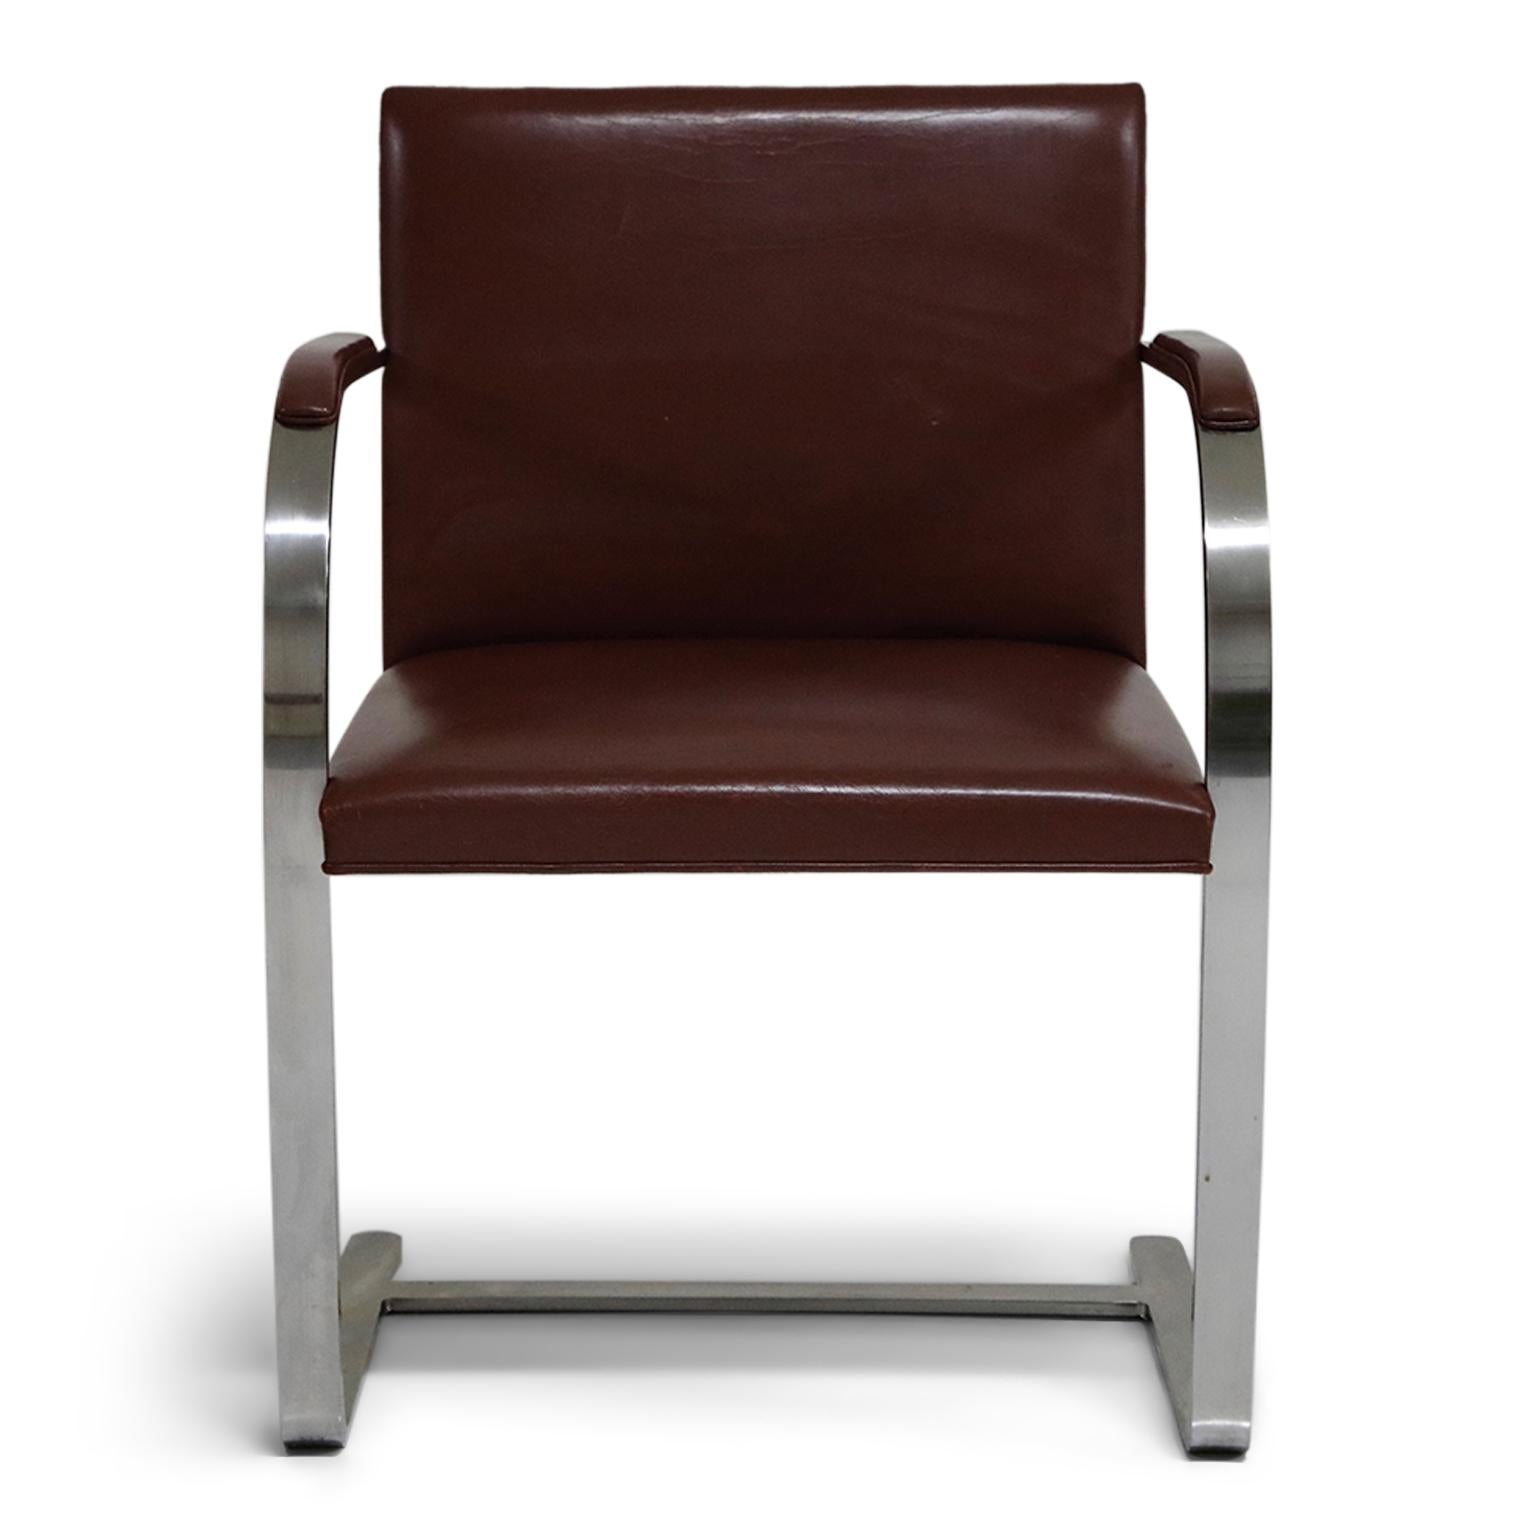 Rare original early production Knoll International 'Brno' Chairs in an incredible burgundy leather. Priced as a pair, these collectible 2nd generation productions by Knoll International have an attractive and lovely patina to the leather and is